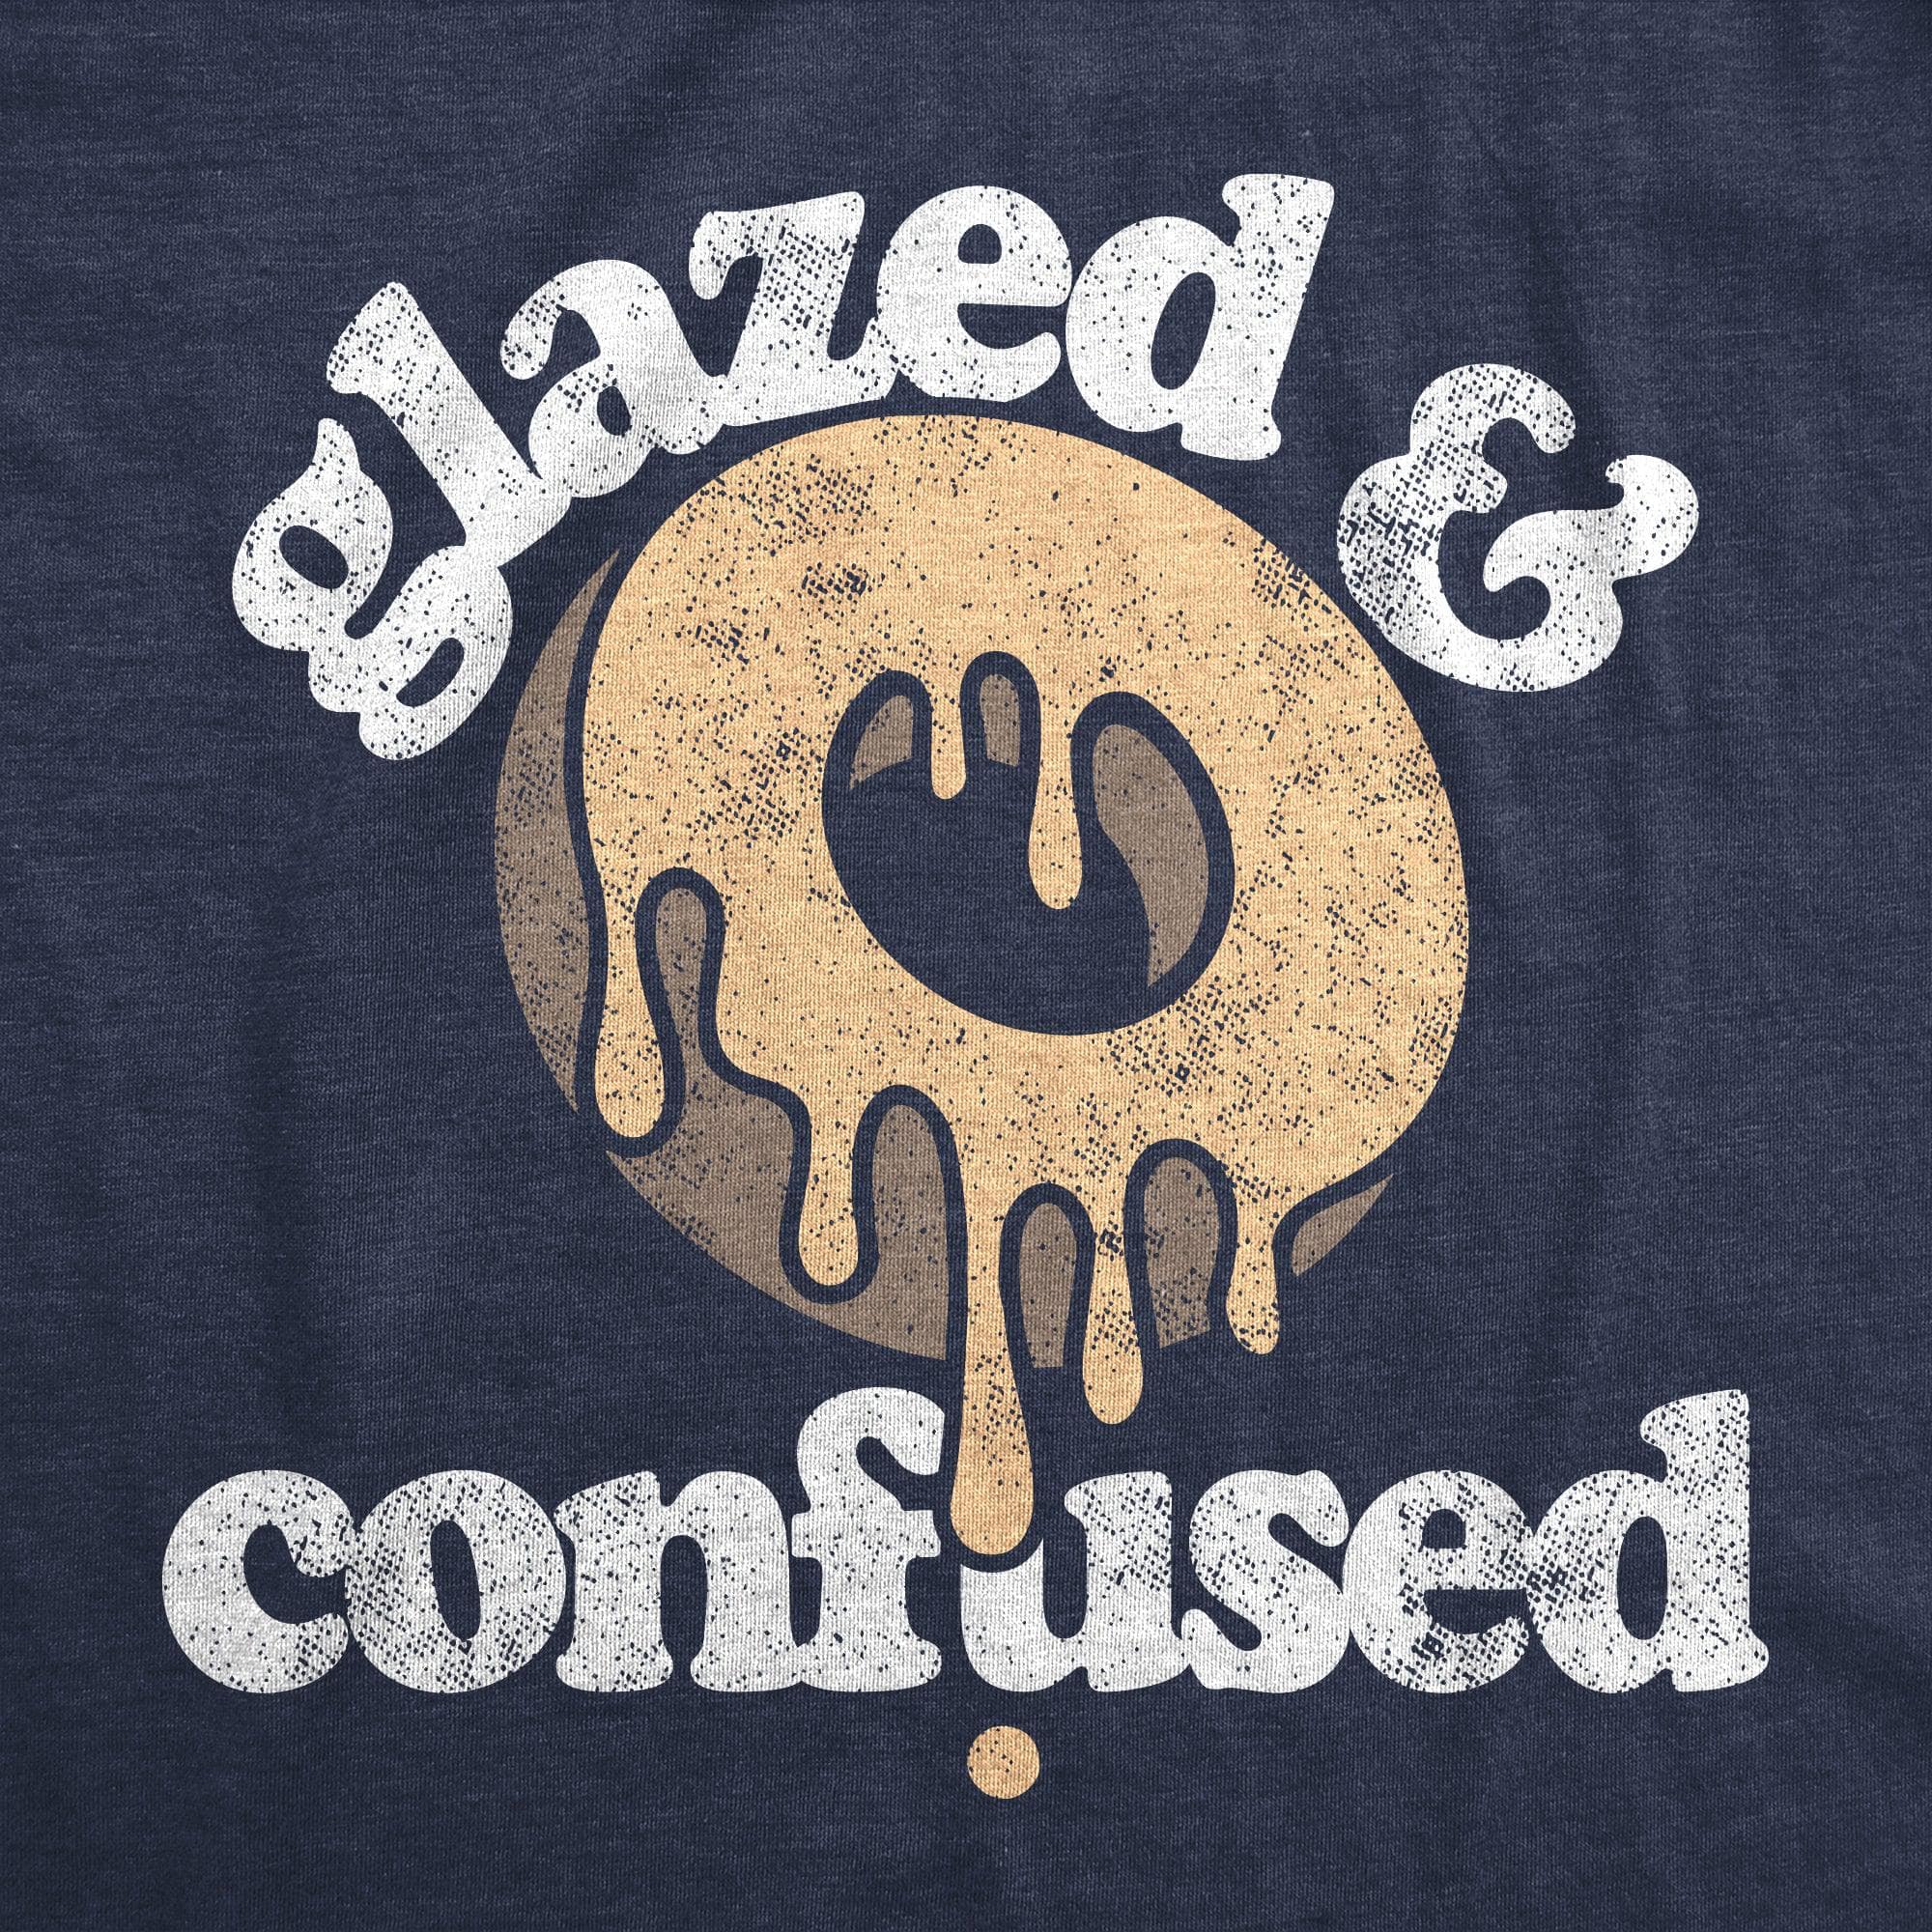 Glazed And Confused Women's Tshirt  -  Crazy Dog T-Shirts